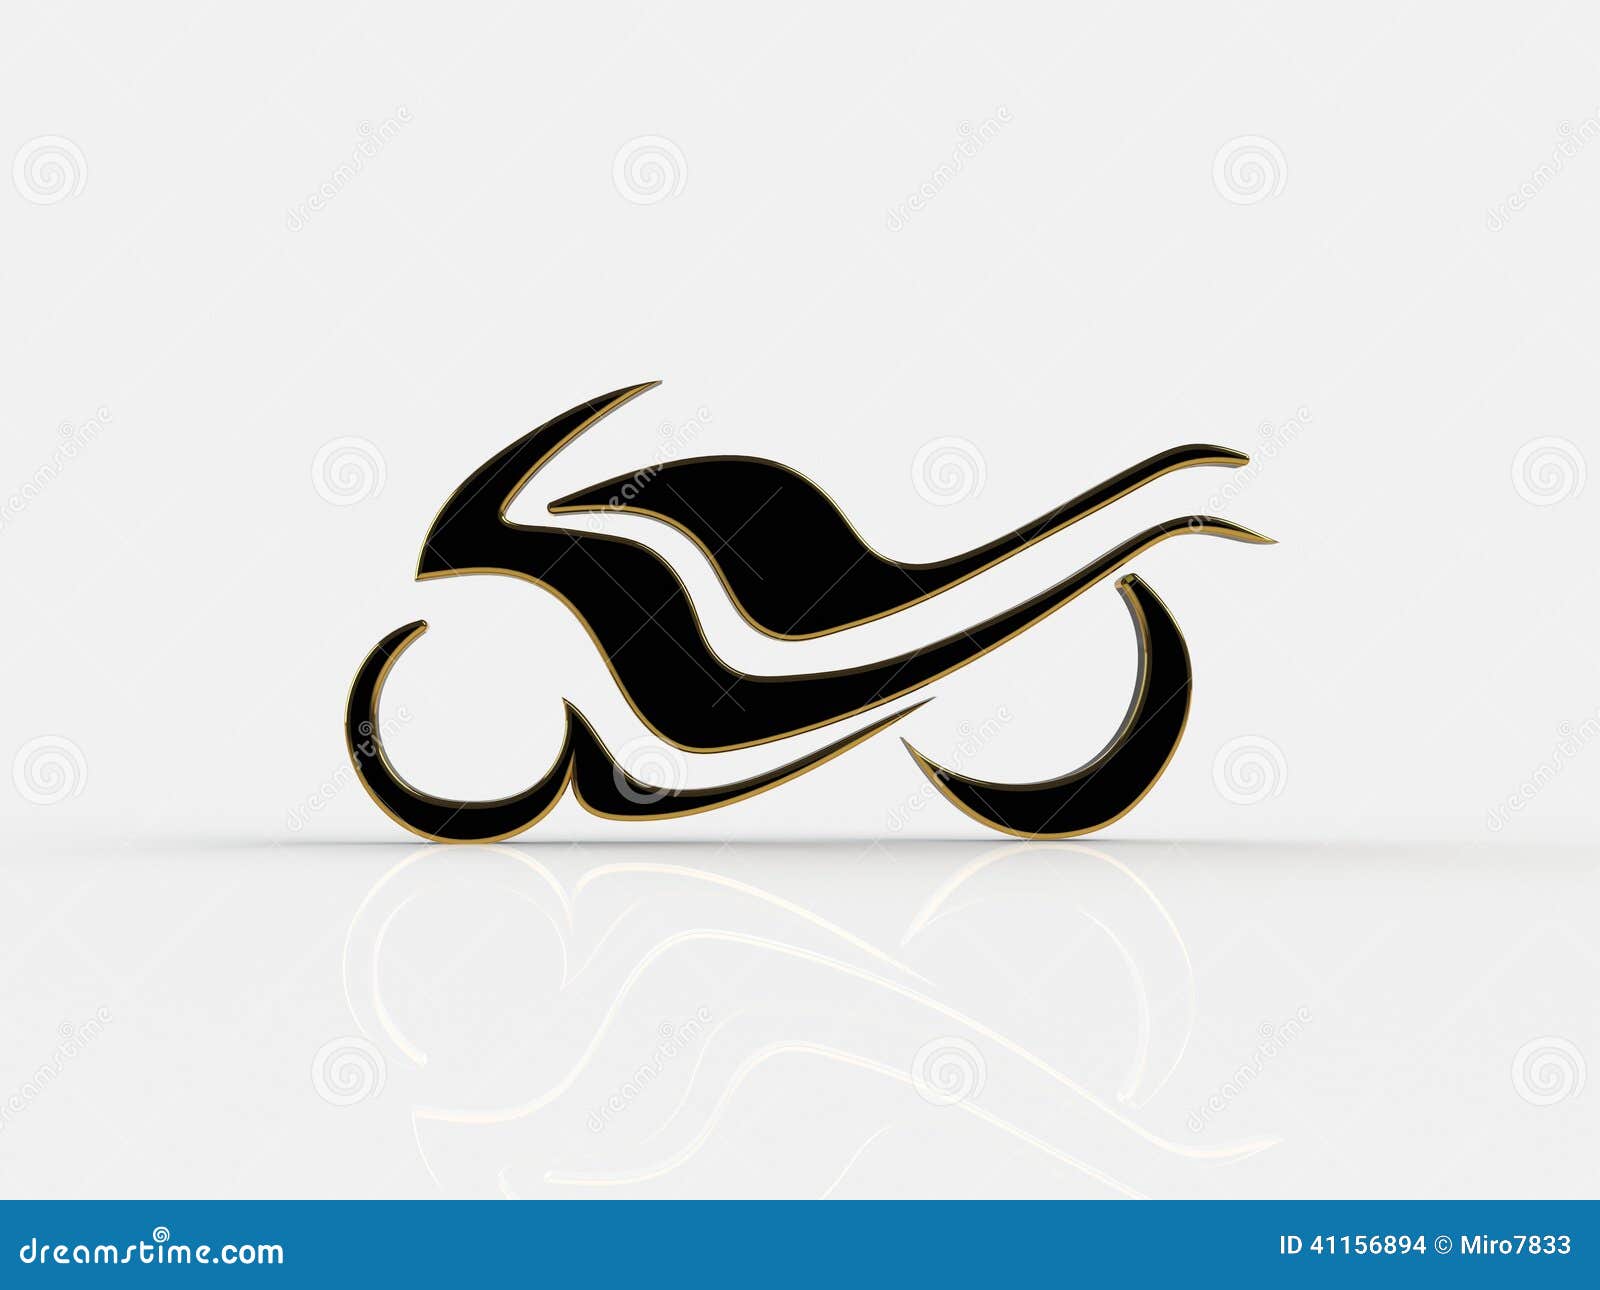 Abstract Racing Motorcycle On A White Background Stock Illustration - Illustration of ...